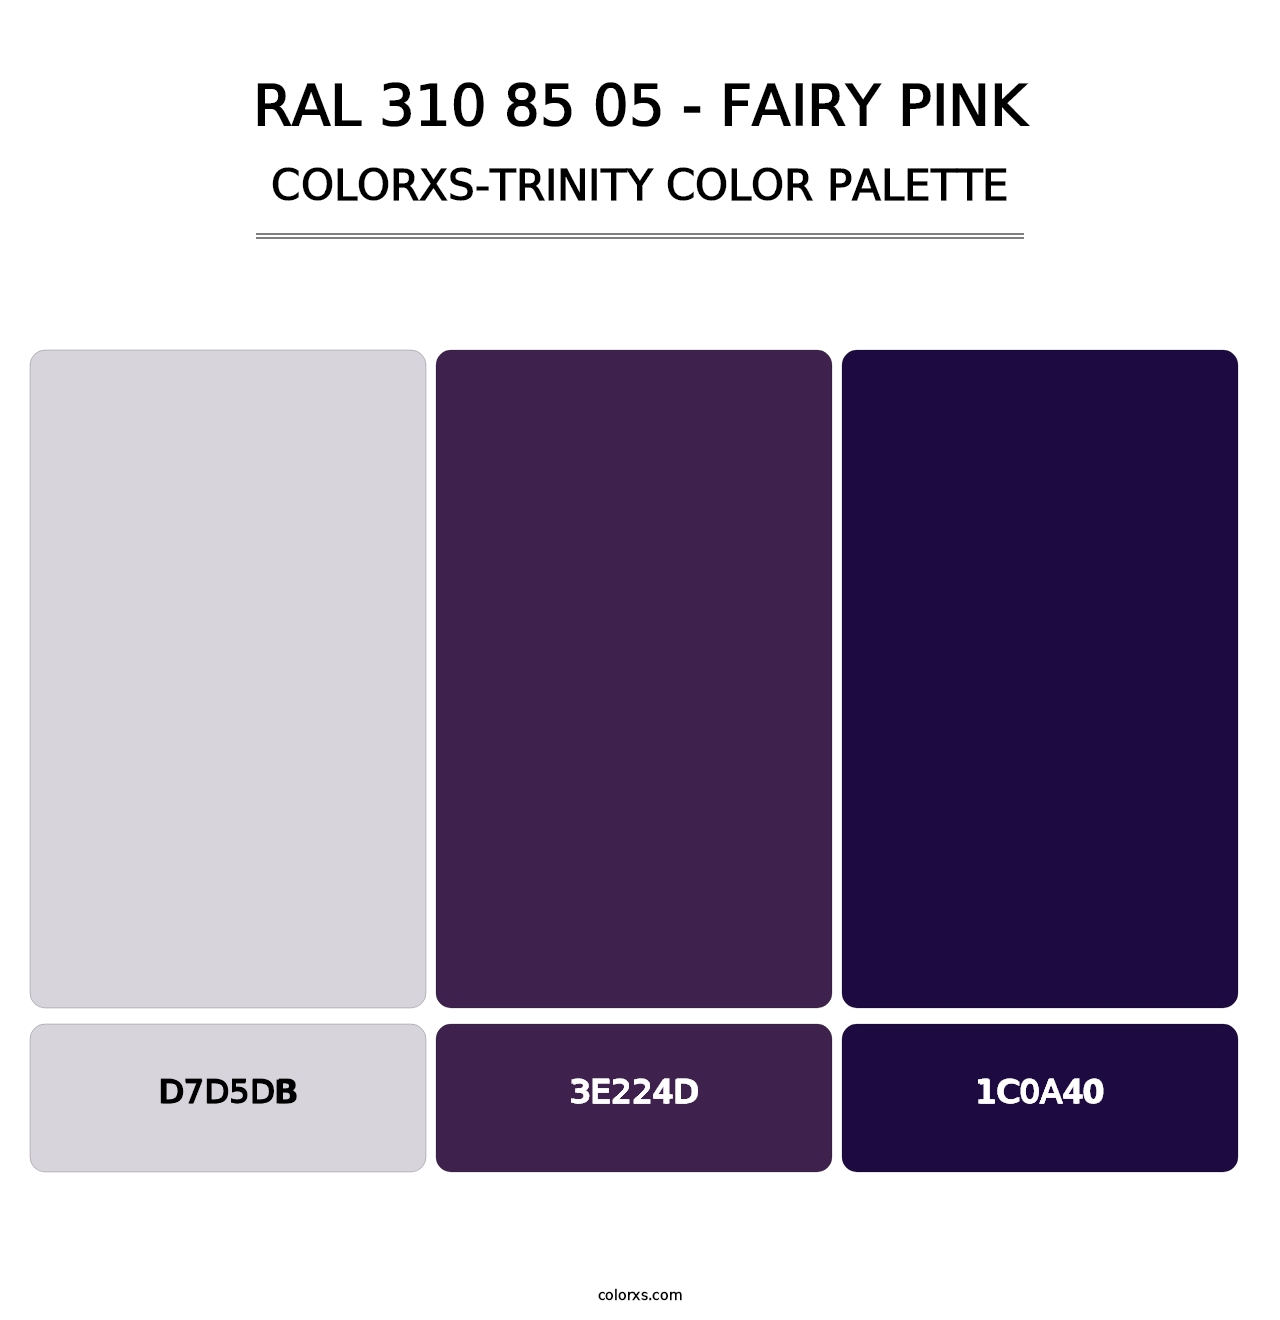 RAL 310 85 05 - Fairy Pink - Colorxs Trinity Palette